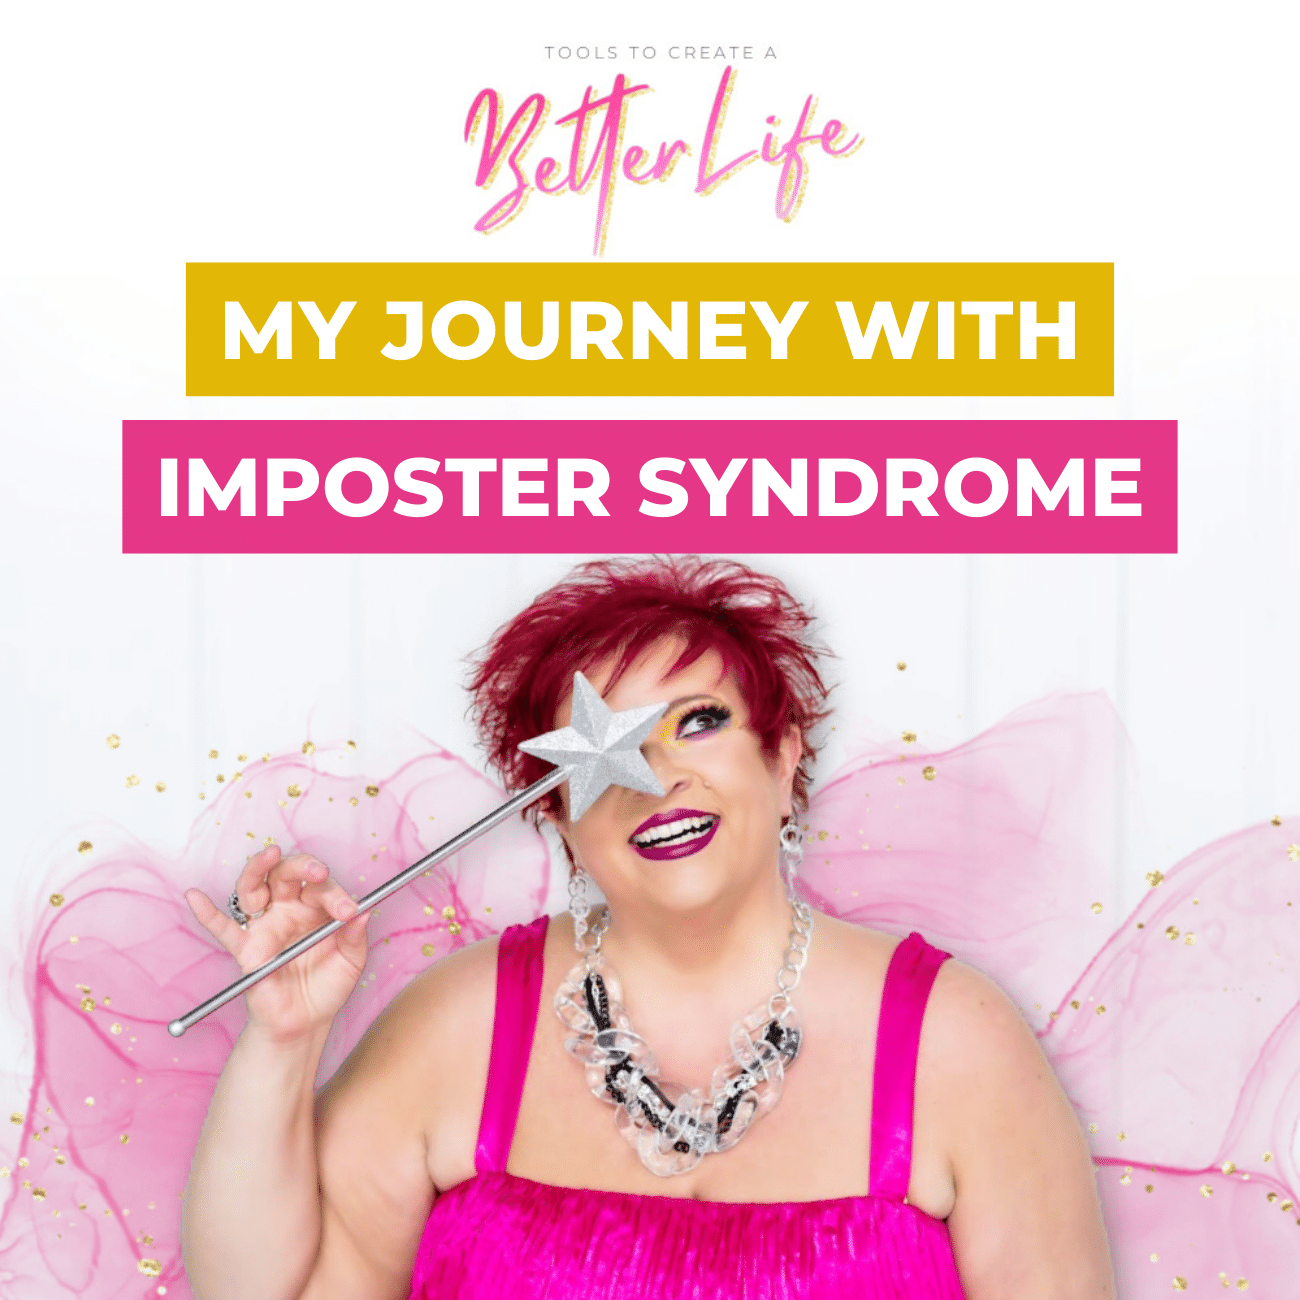 My Journey with Imposter Syndrome